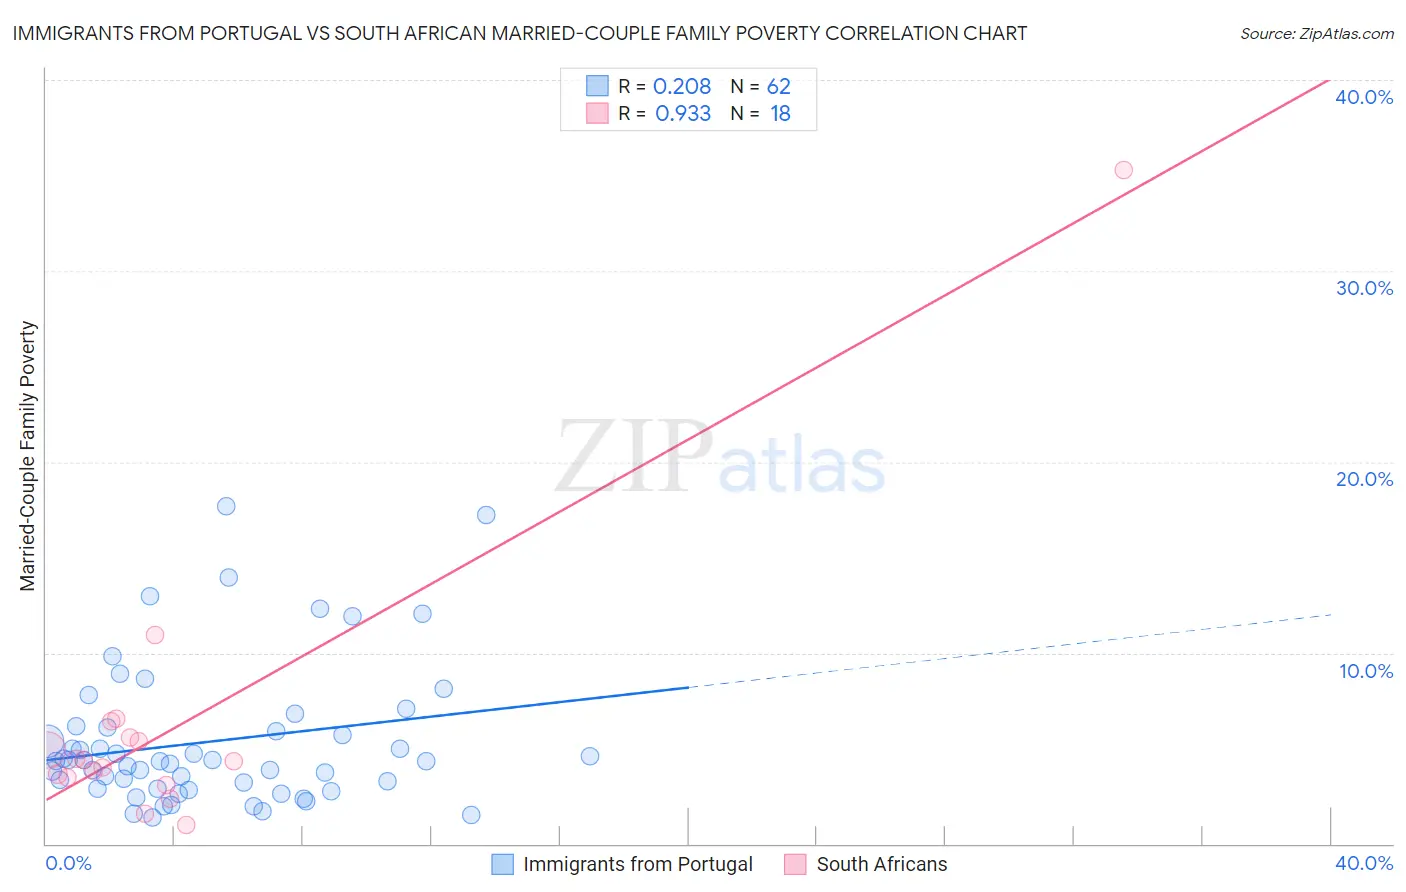 Immigrants from Portugal vs South African Married-Couple Family Poverty